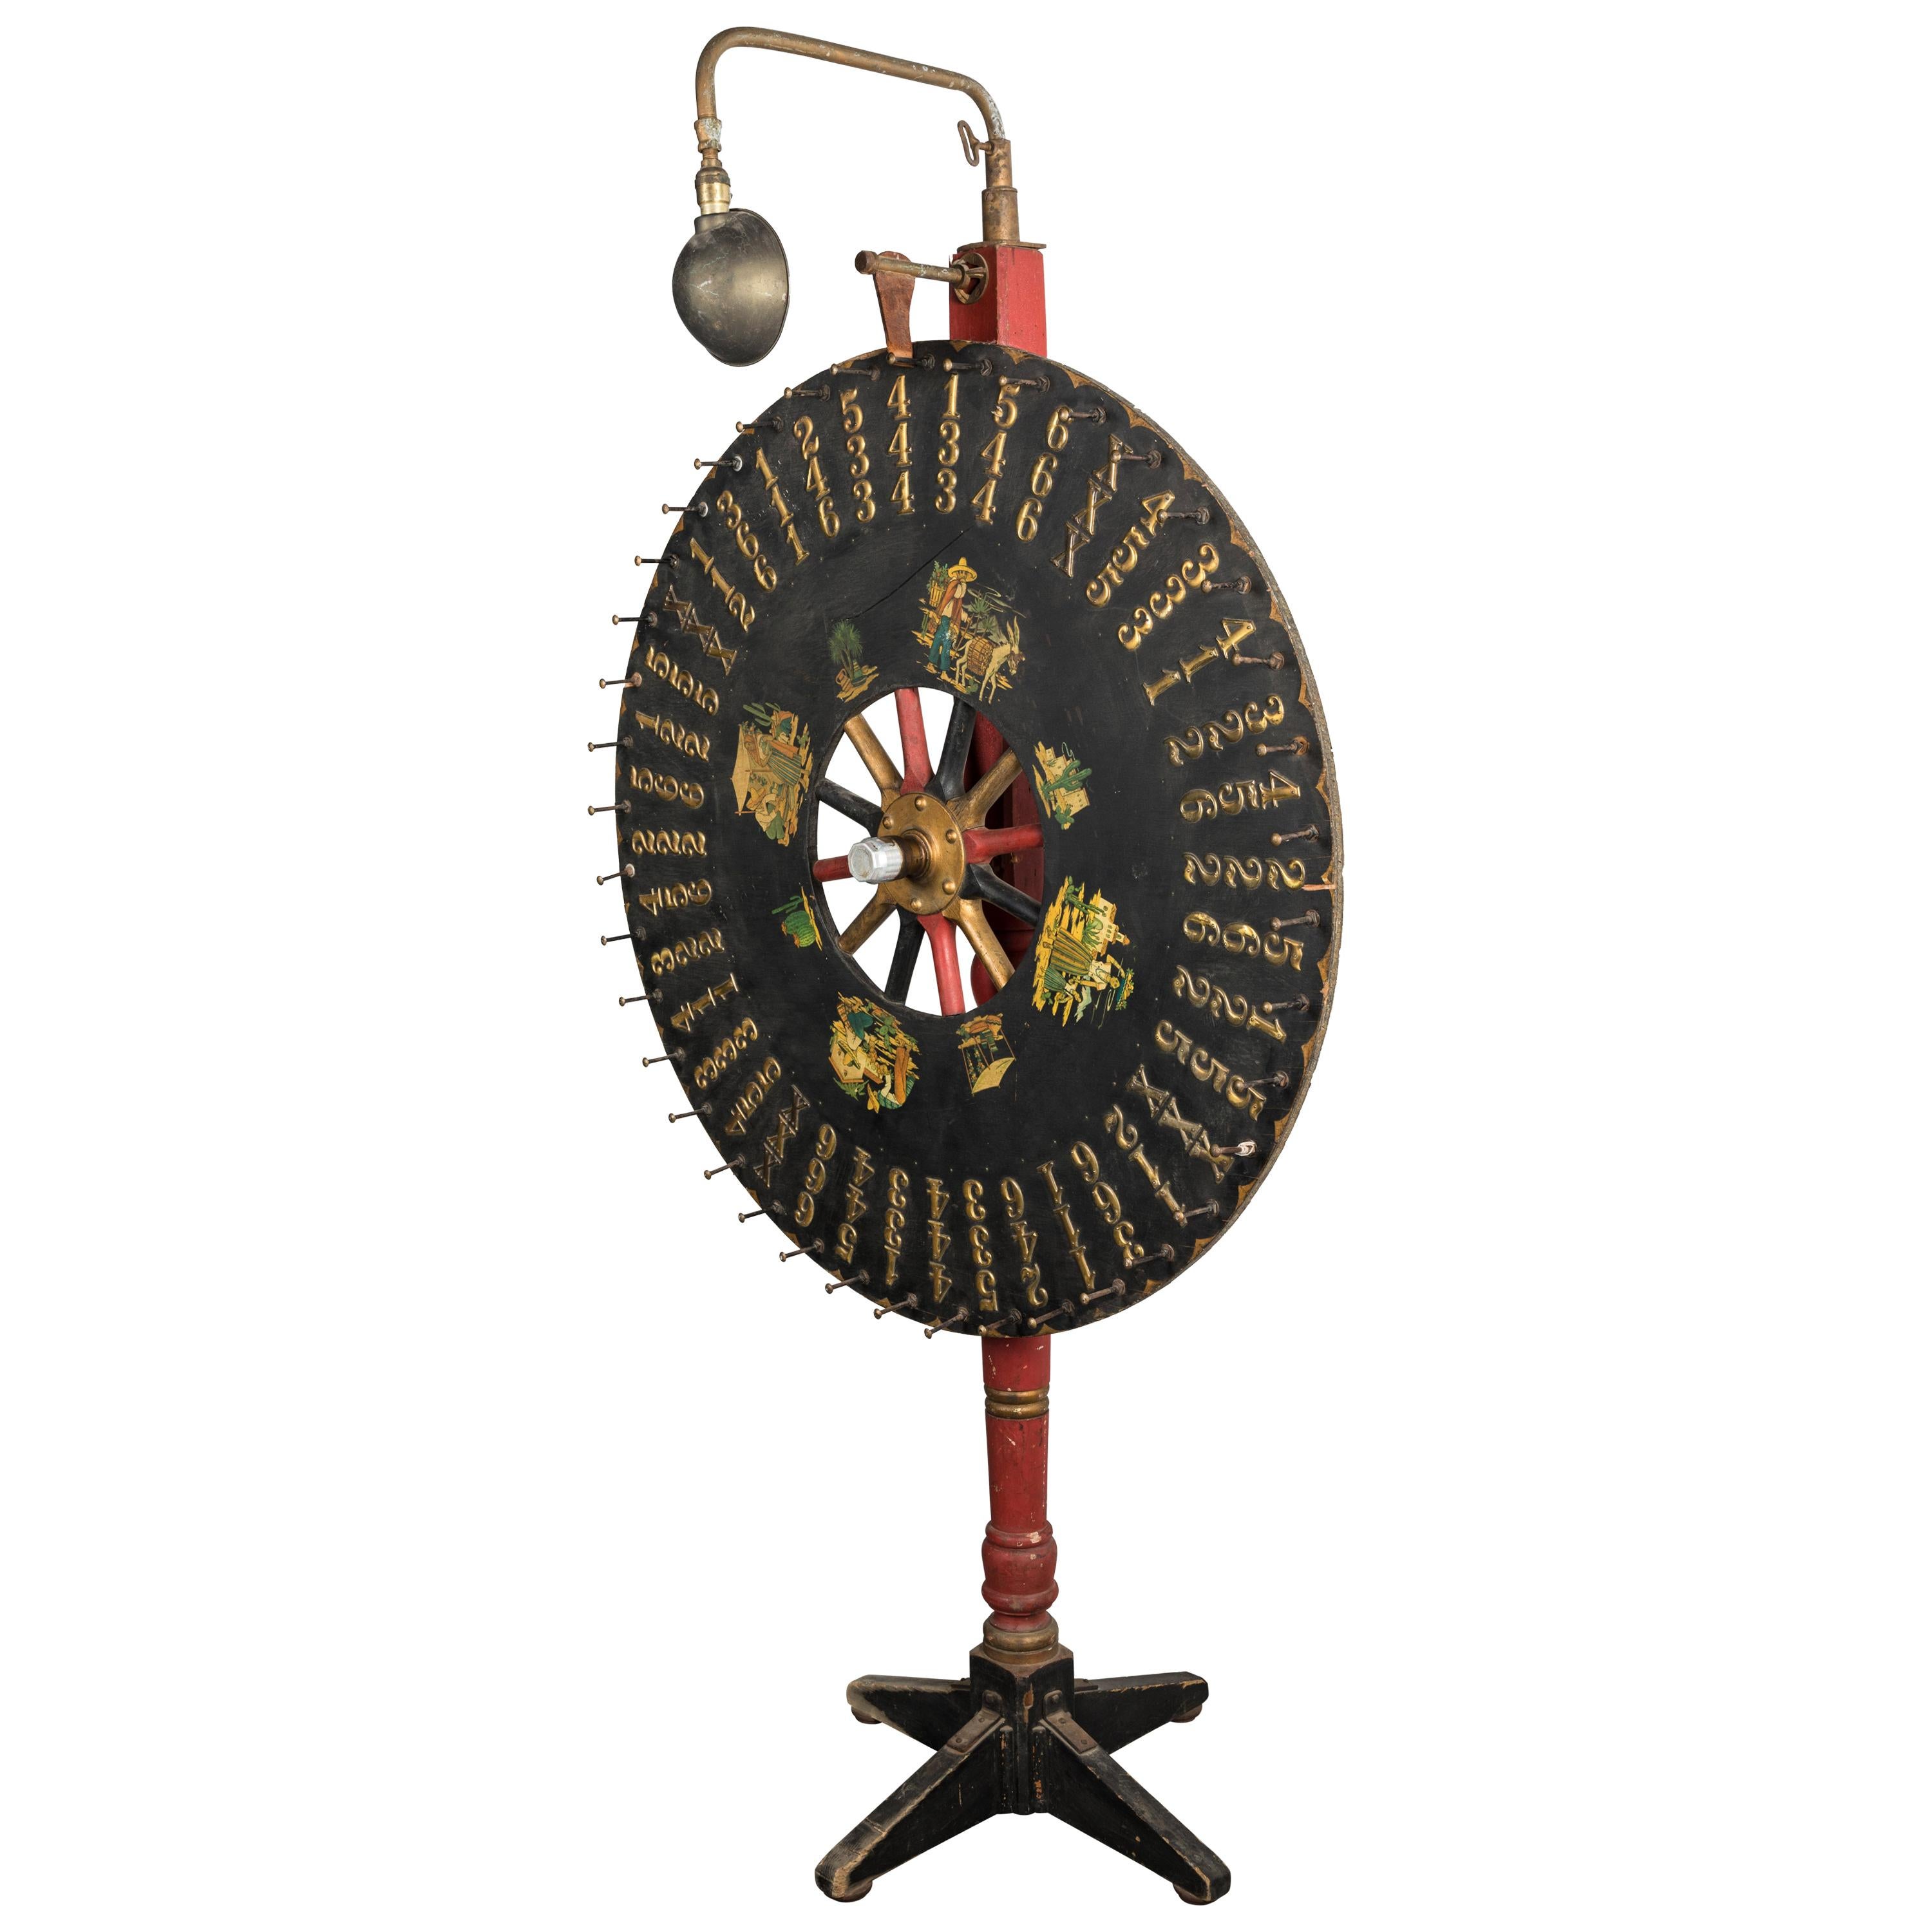 Early Carnival Midway 7.5 Foot Tall Game Wheel Monterey with Gooseneck Light